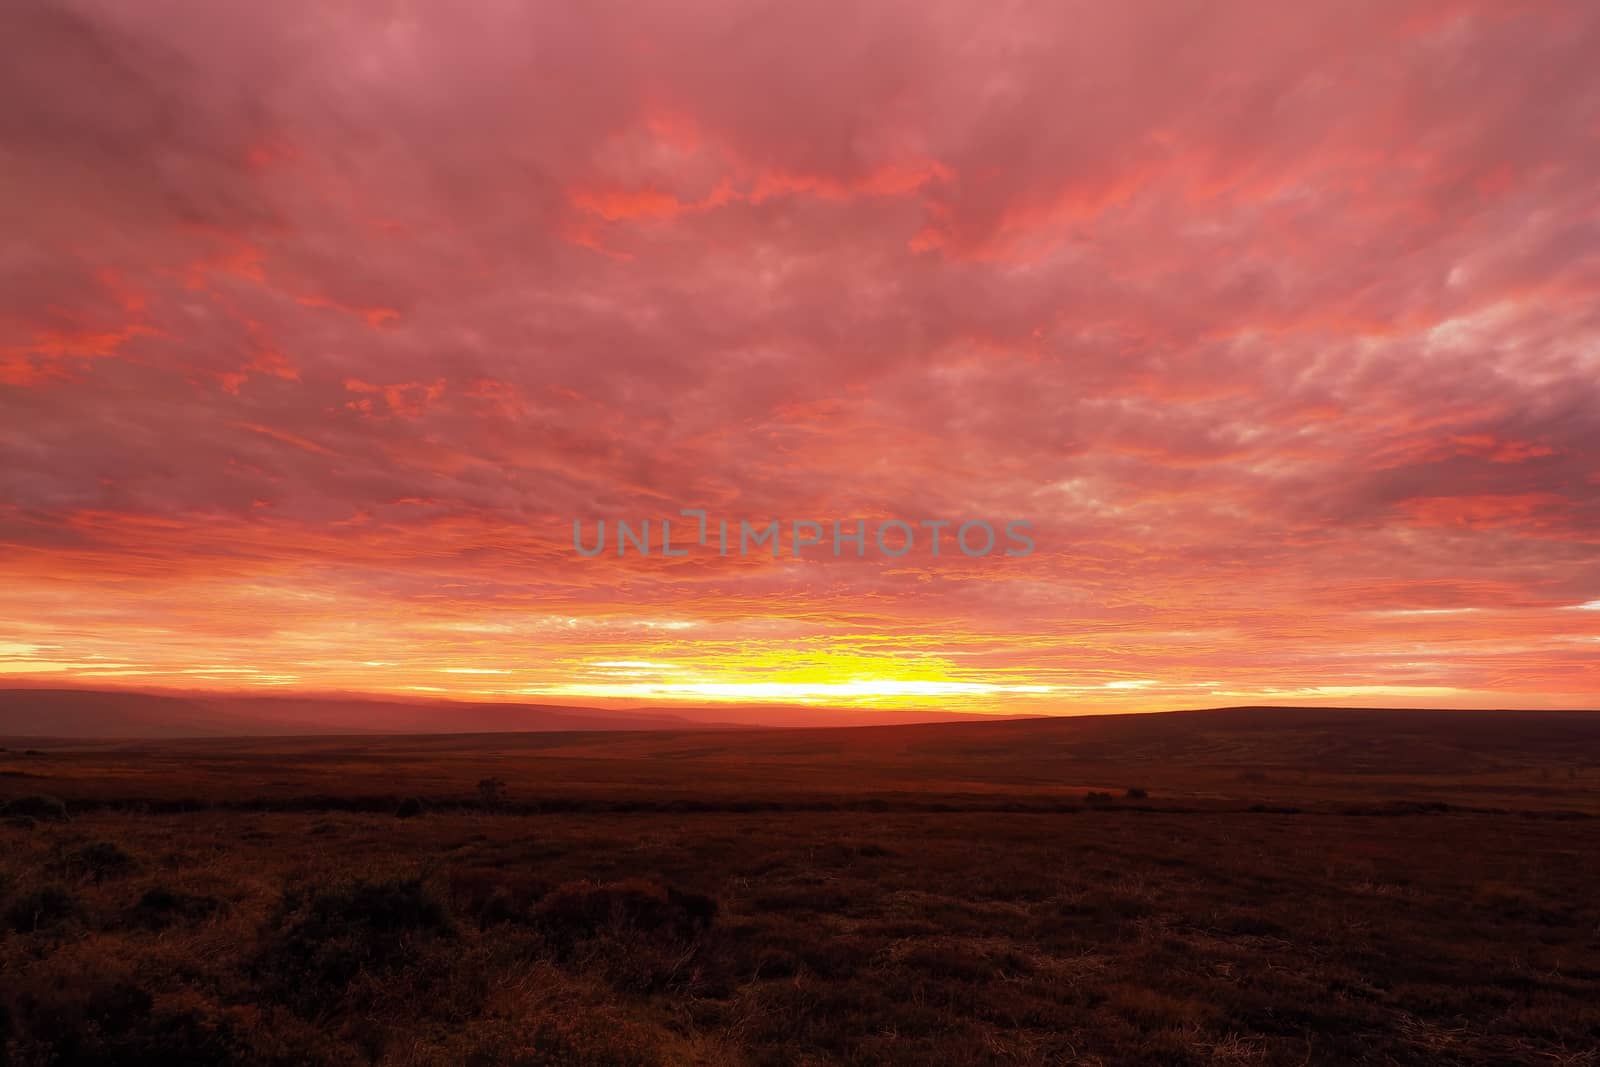 Magnificent sunset lighting up the clouds yellow, orange and red over Danby Moor, North York Moors National Park, UK